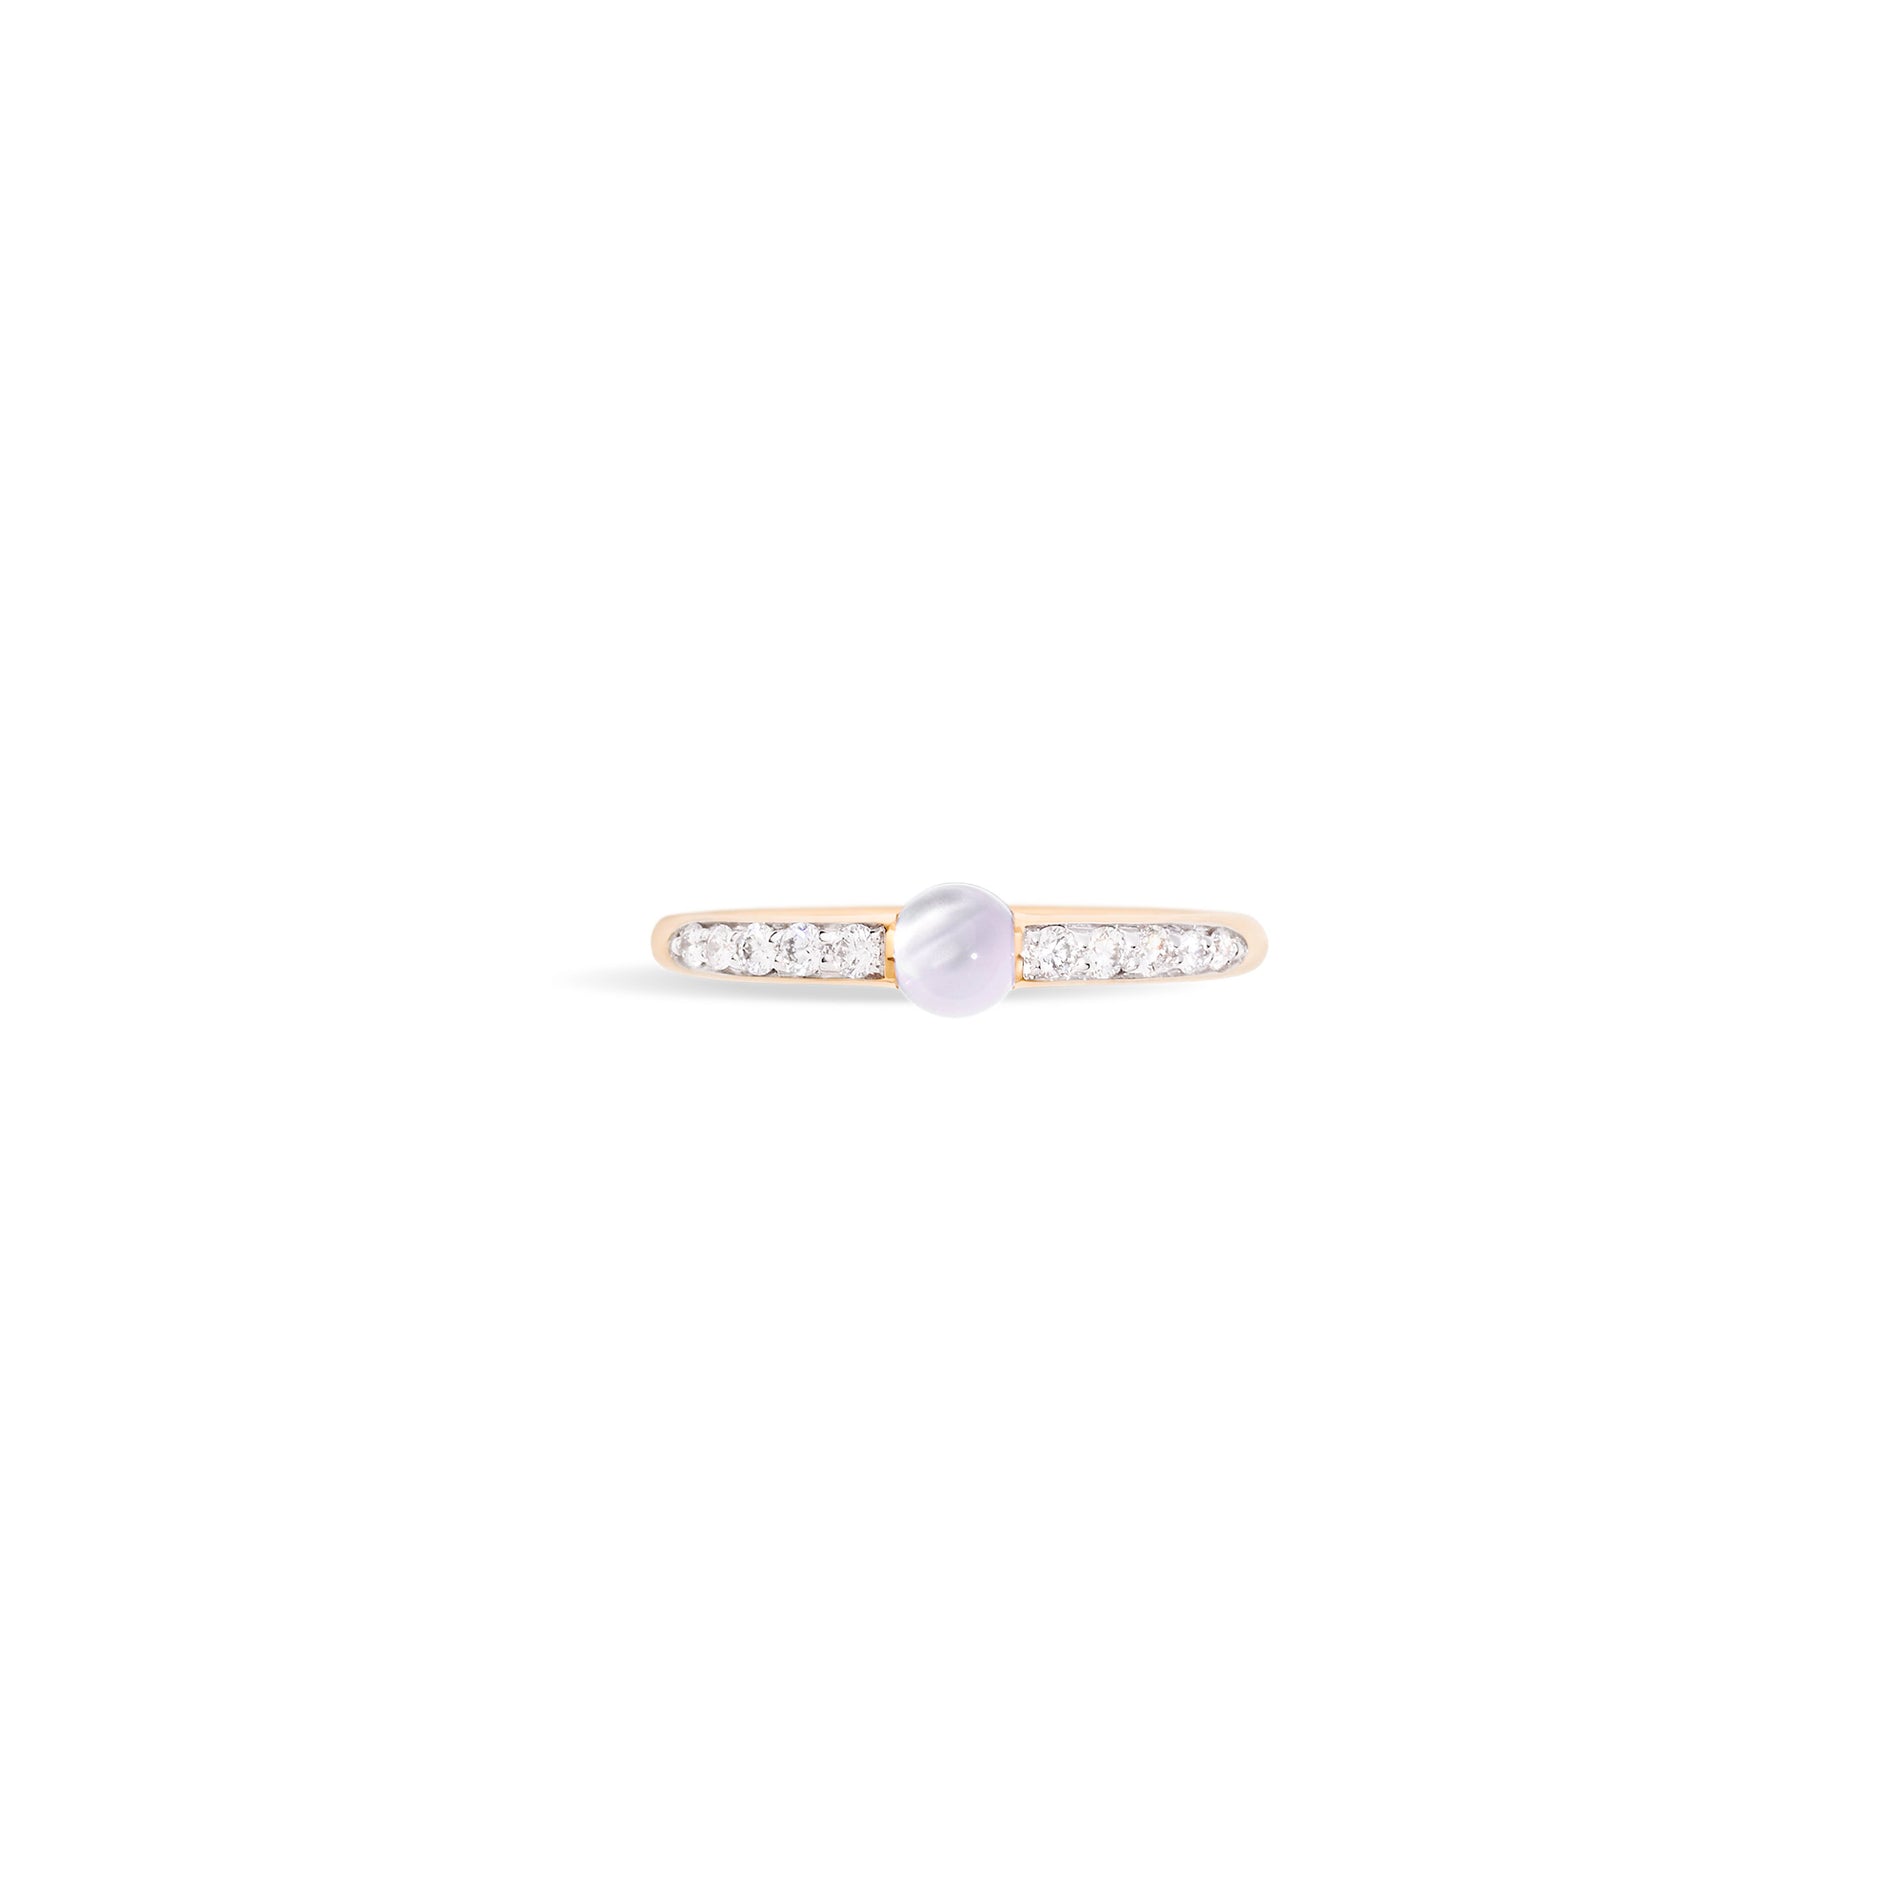 M'ama non M'ama Ring in 18k Rose Gold with Moon Stone and Diamonds - Orsini Jewellers NZ